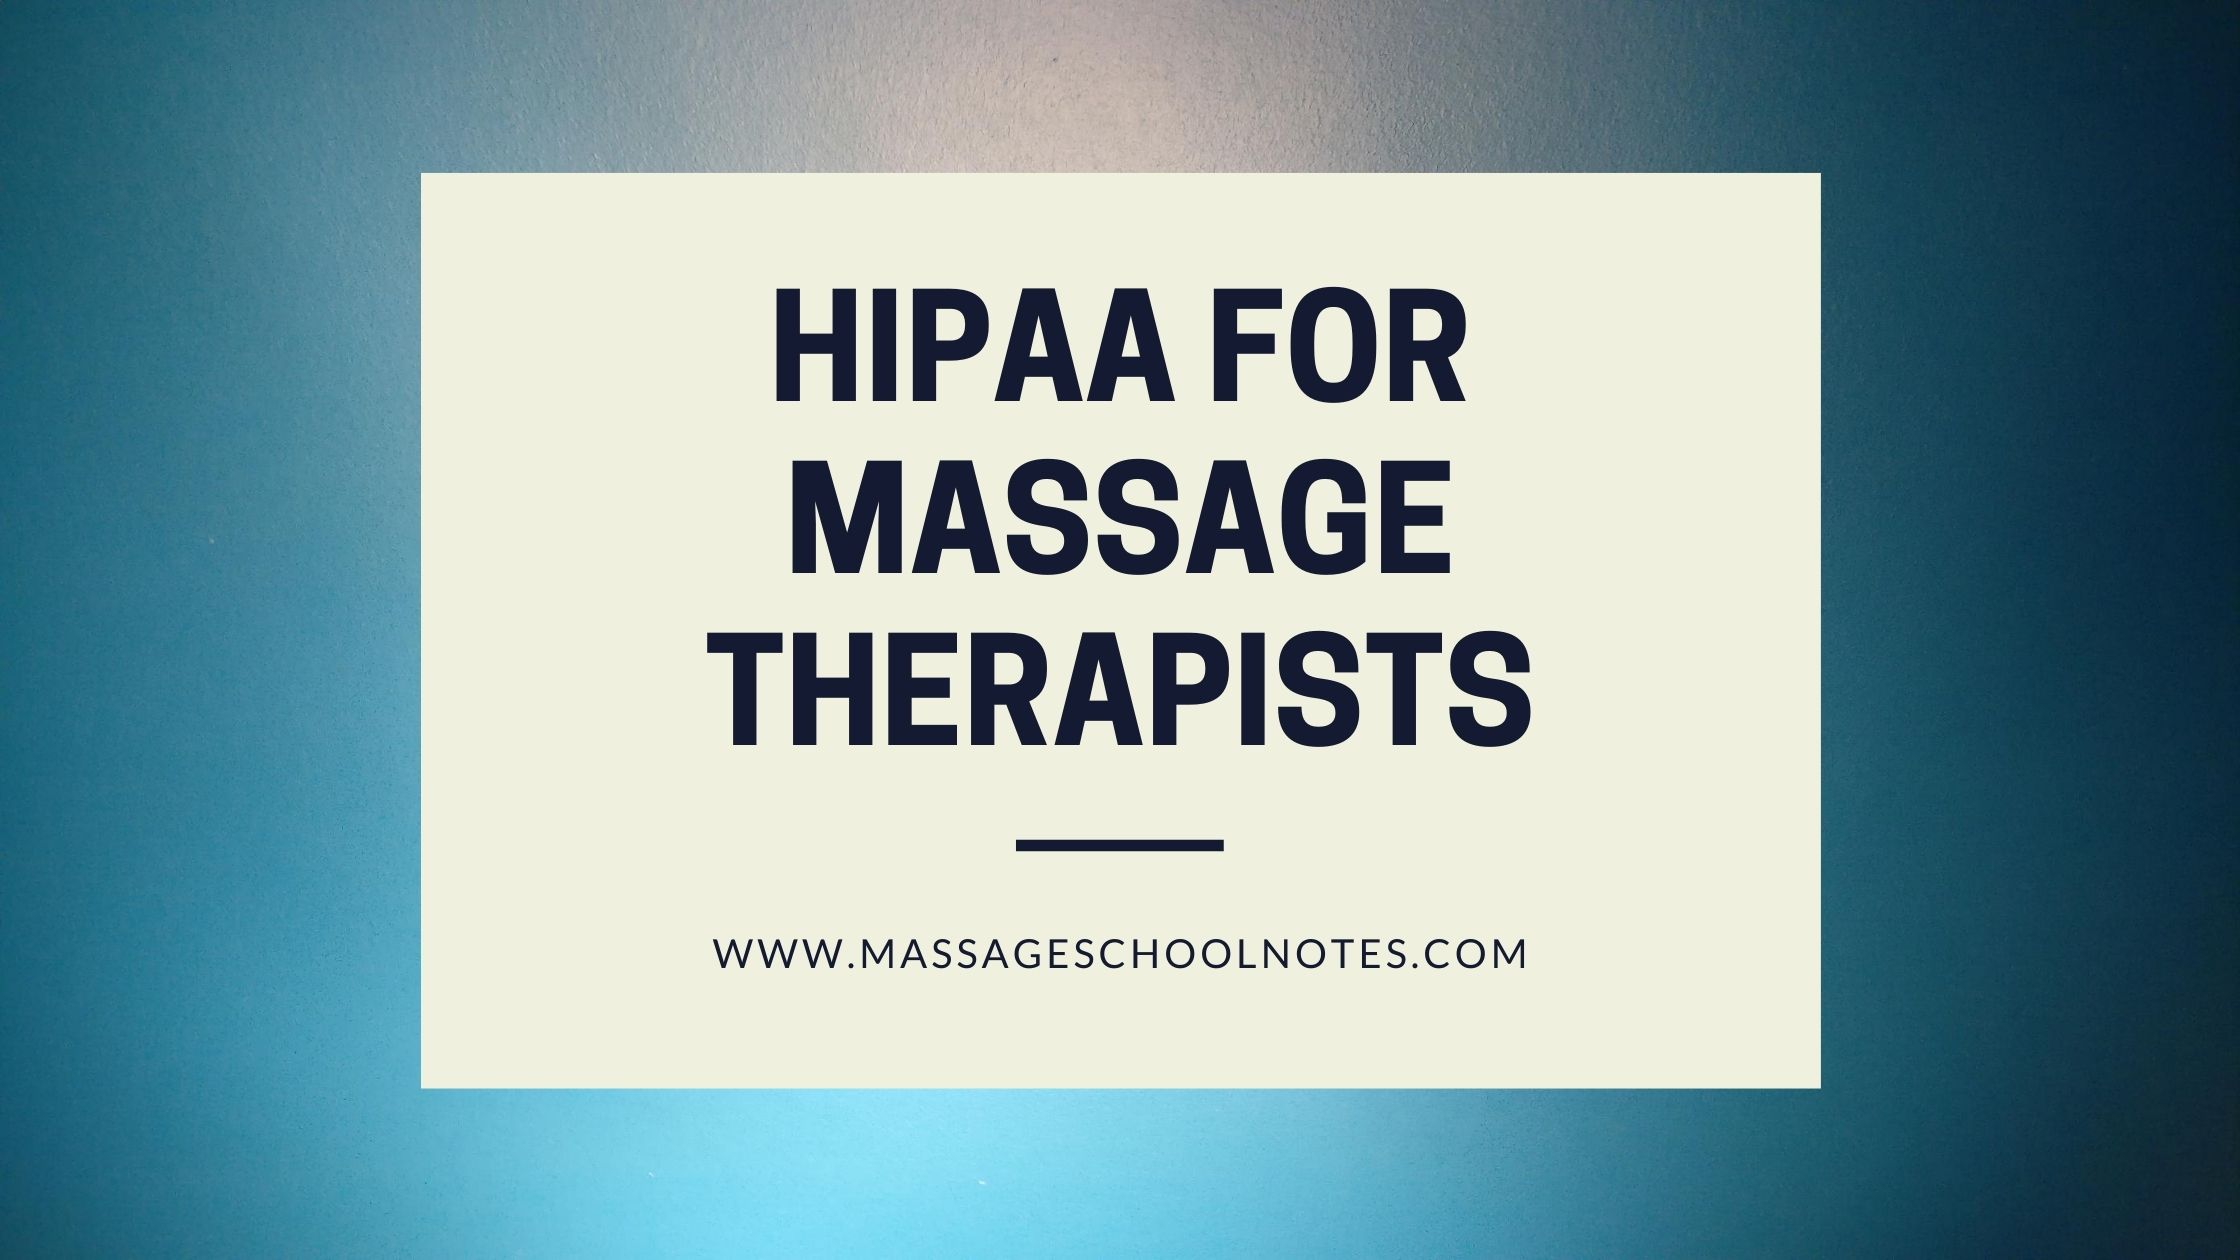 HIPAA for Massage Therapists – Just do it.